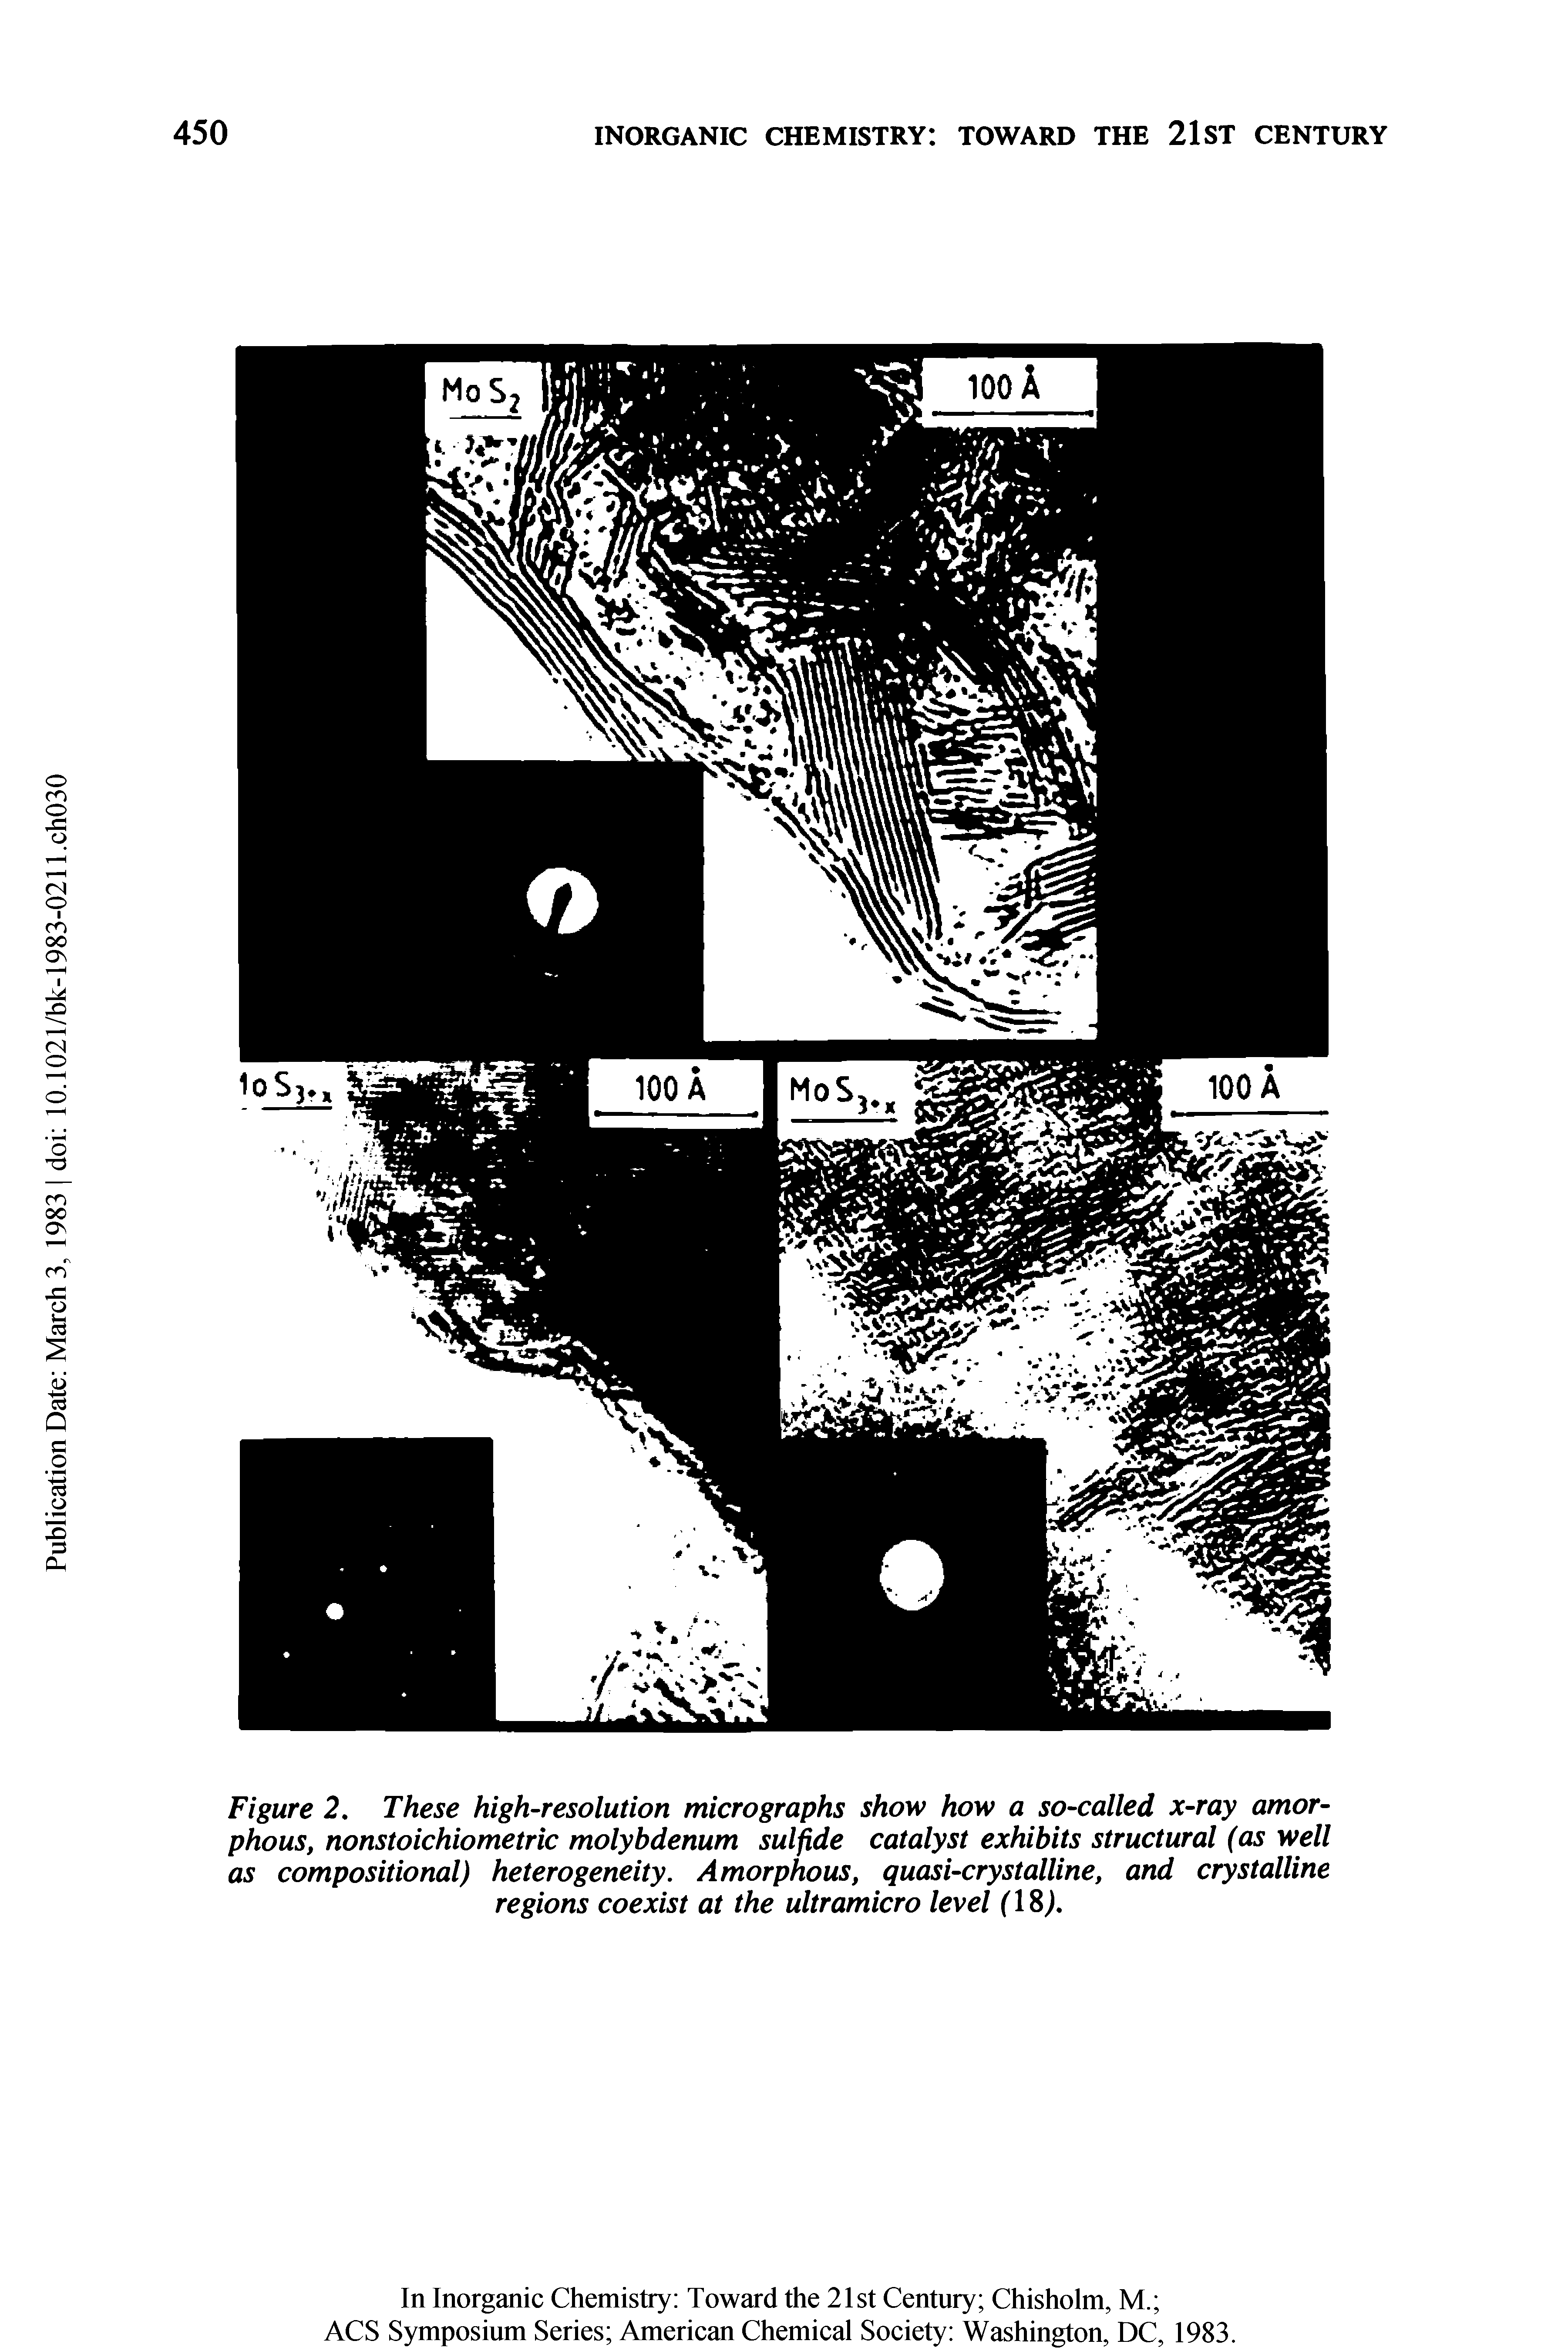 Figure 2. These high-resolution micrographs show how a so-called x-ray amorphous, nonstoichiometric molybdenum sulfide catalyst exhibits structural (as well as compositional) heterogeneity. Amorphous, quasi-crystalline, and crystalline regions coexist at the ultramicro level (18,).